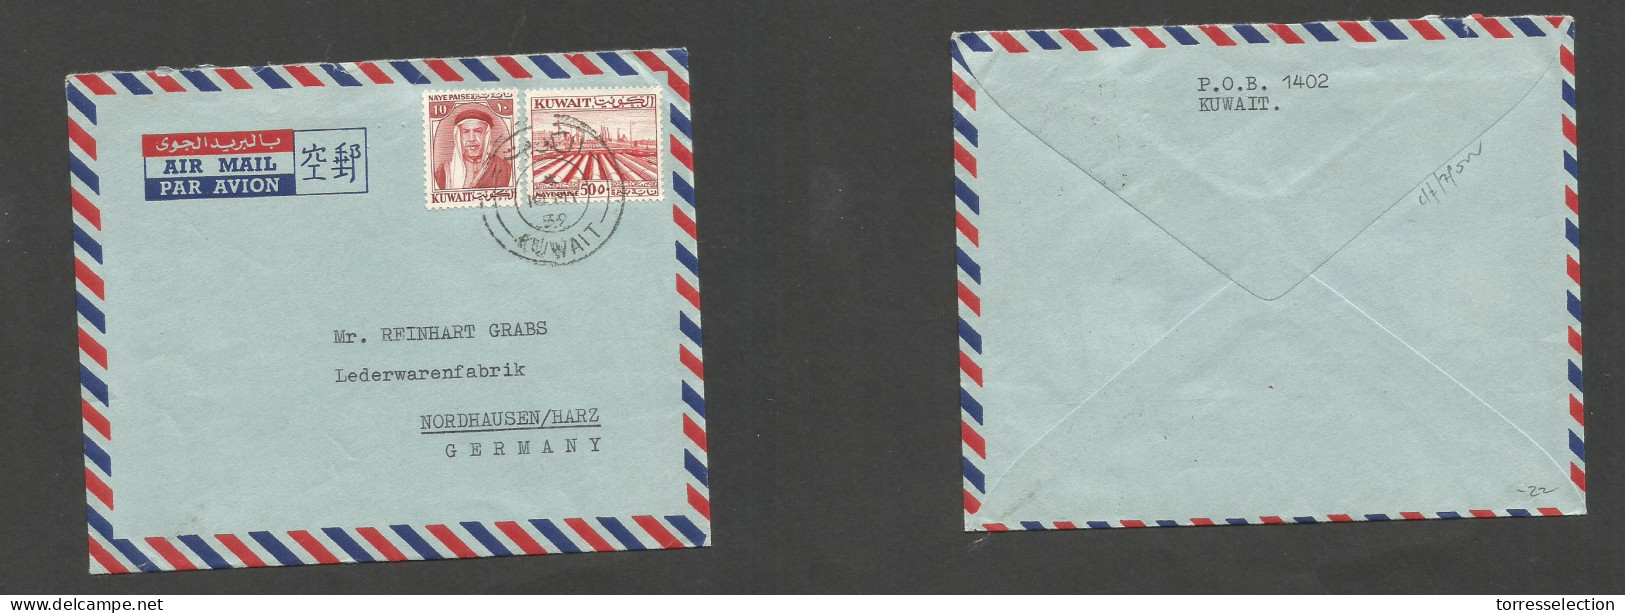 KUWAIT. 1959 (10 May) GPO - Germany, Nordhausen, Harz. Air Multifkd Envelope With Contains. Fine. - Koeweit